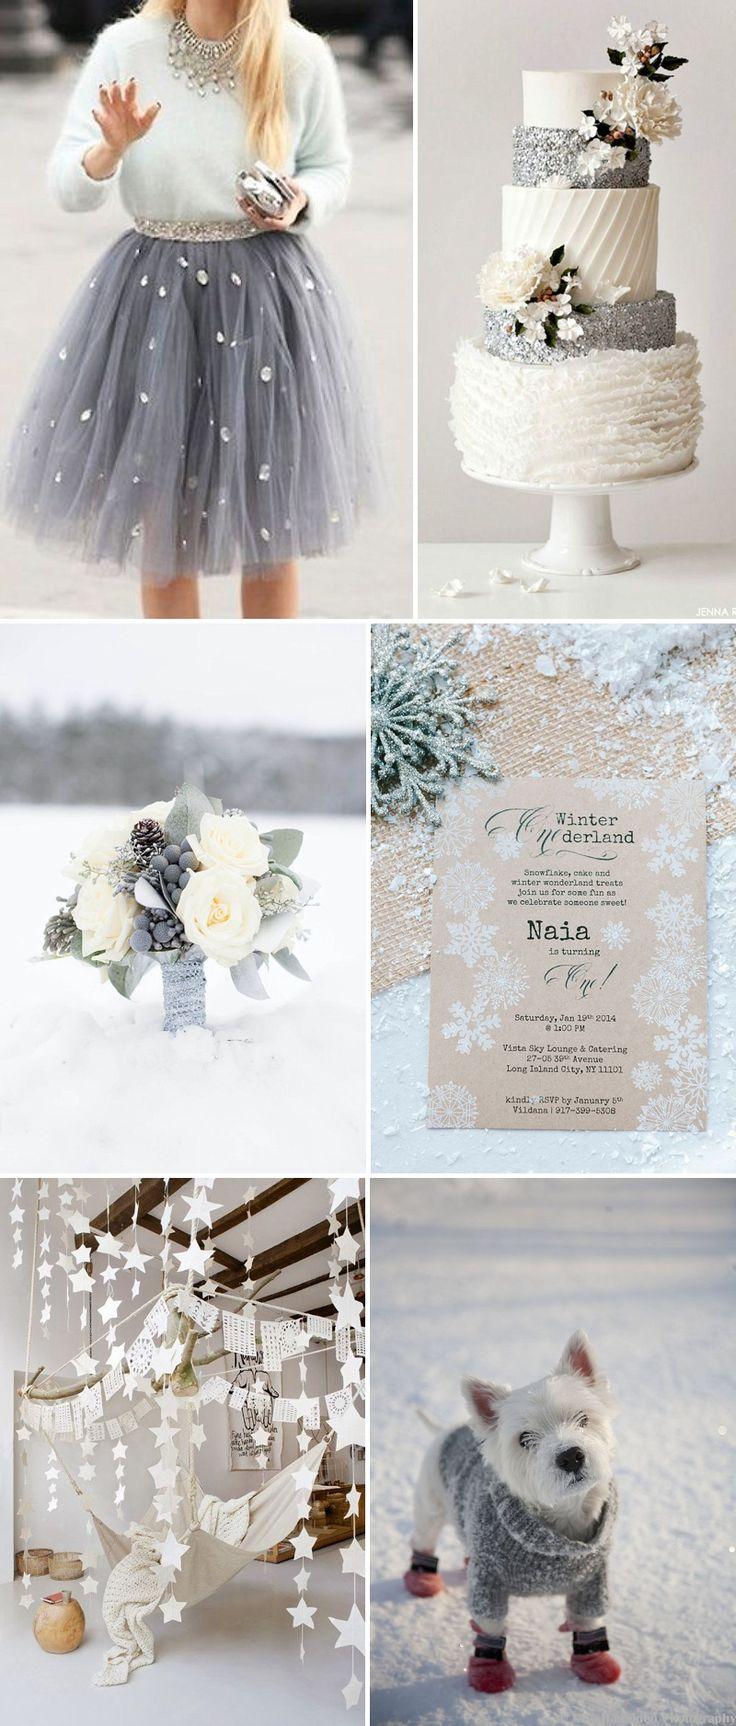 Wedding - The Sparkle Of Winter Frost.